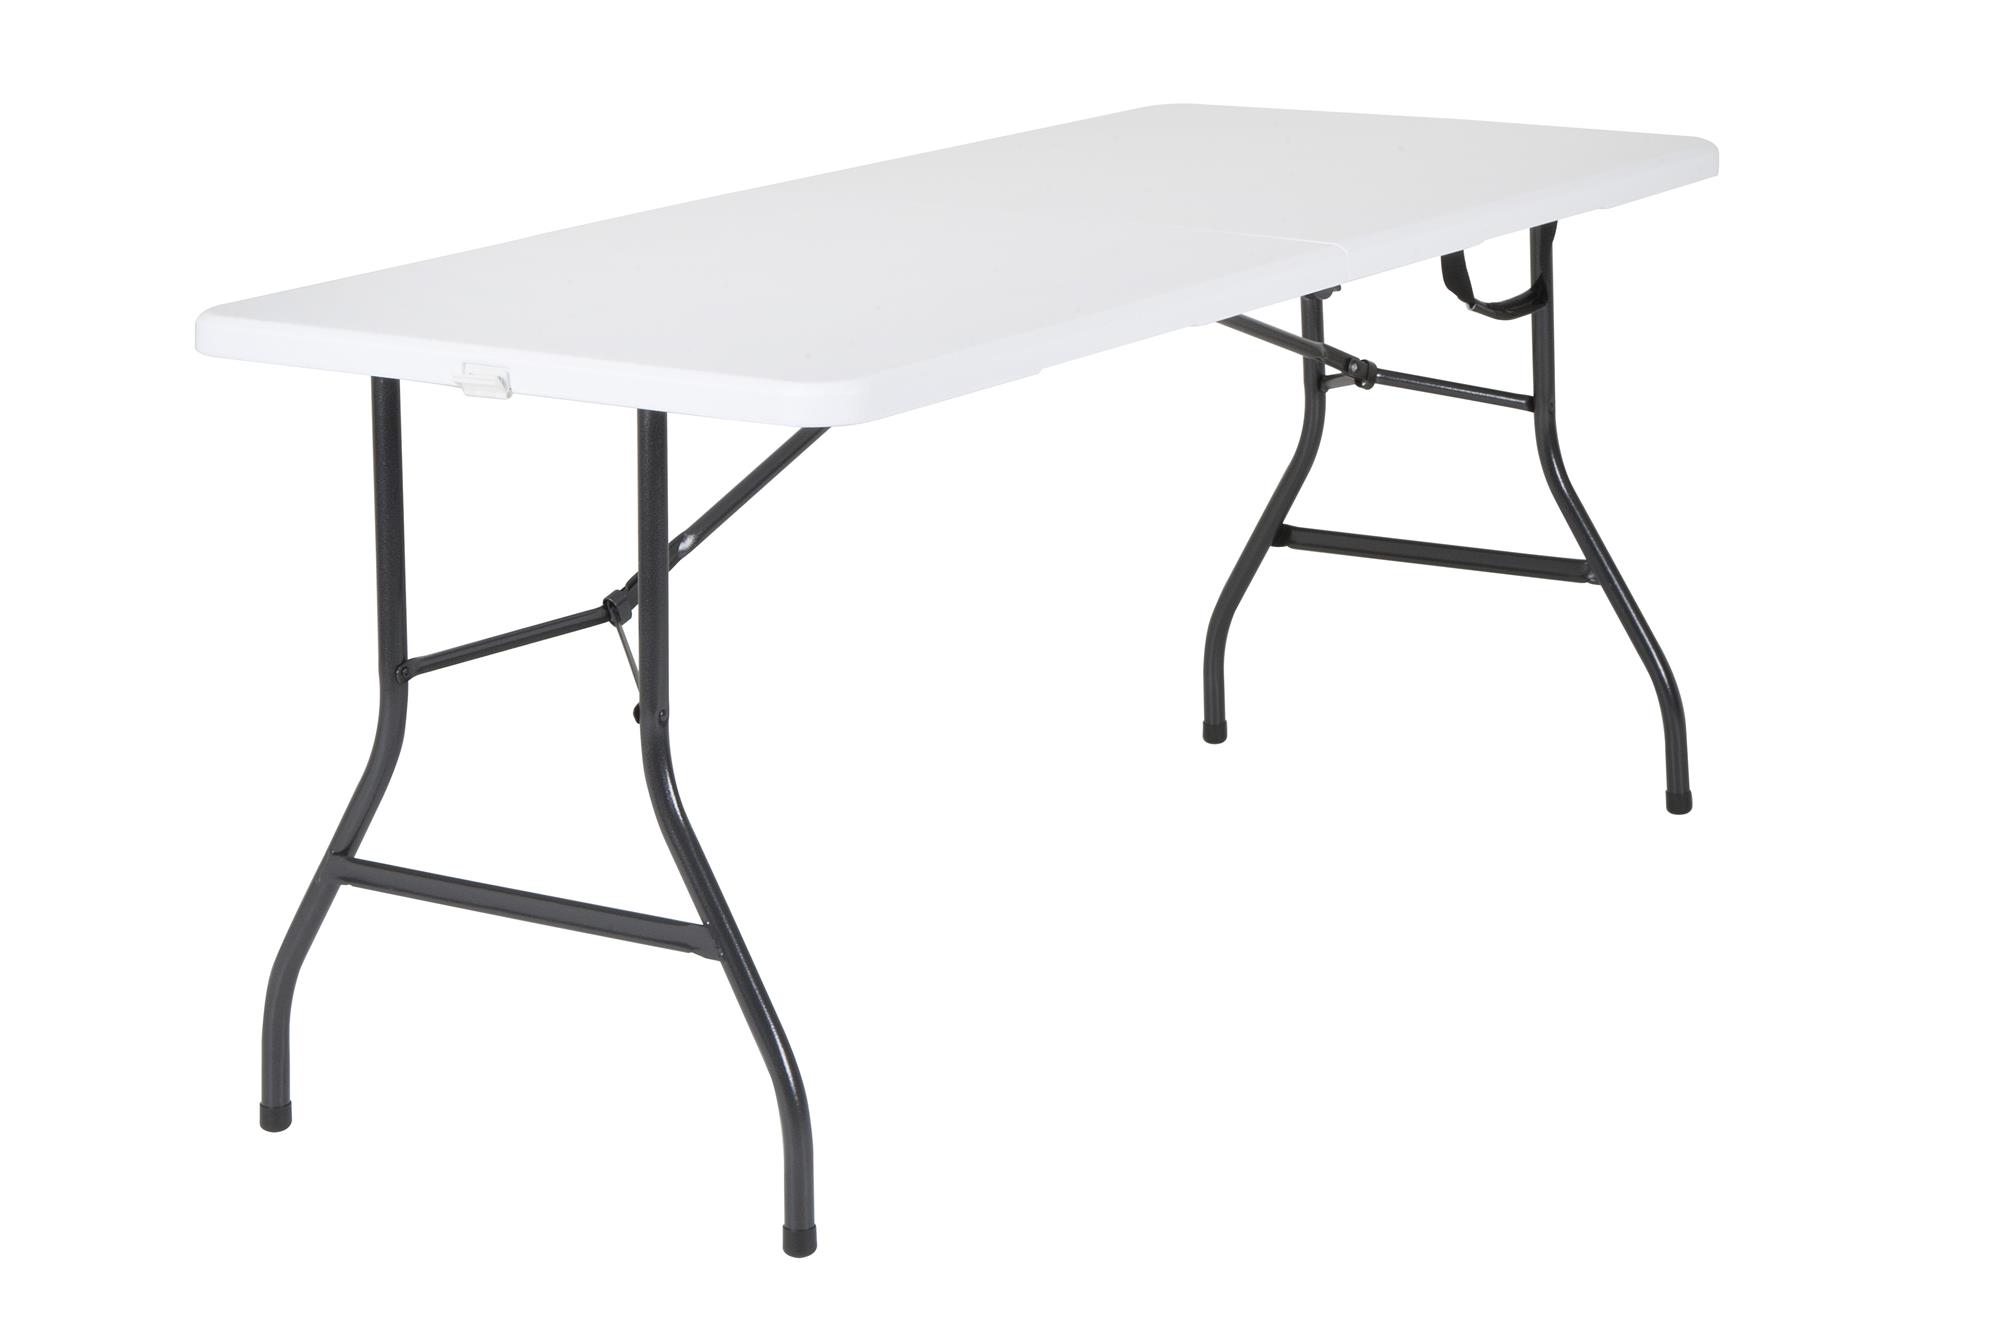 Mainstays 5 Foot Centerfold Folding Table, White - image 1 of 7